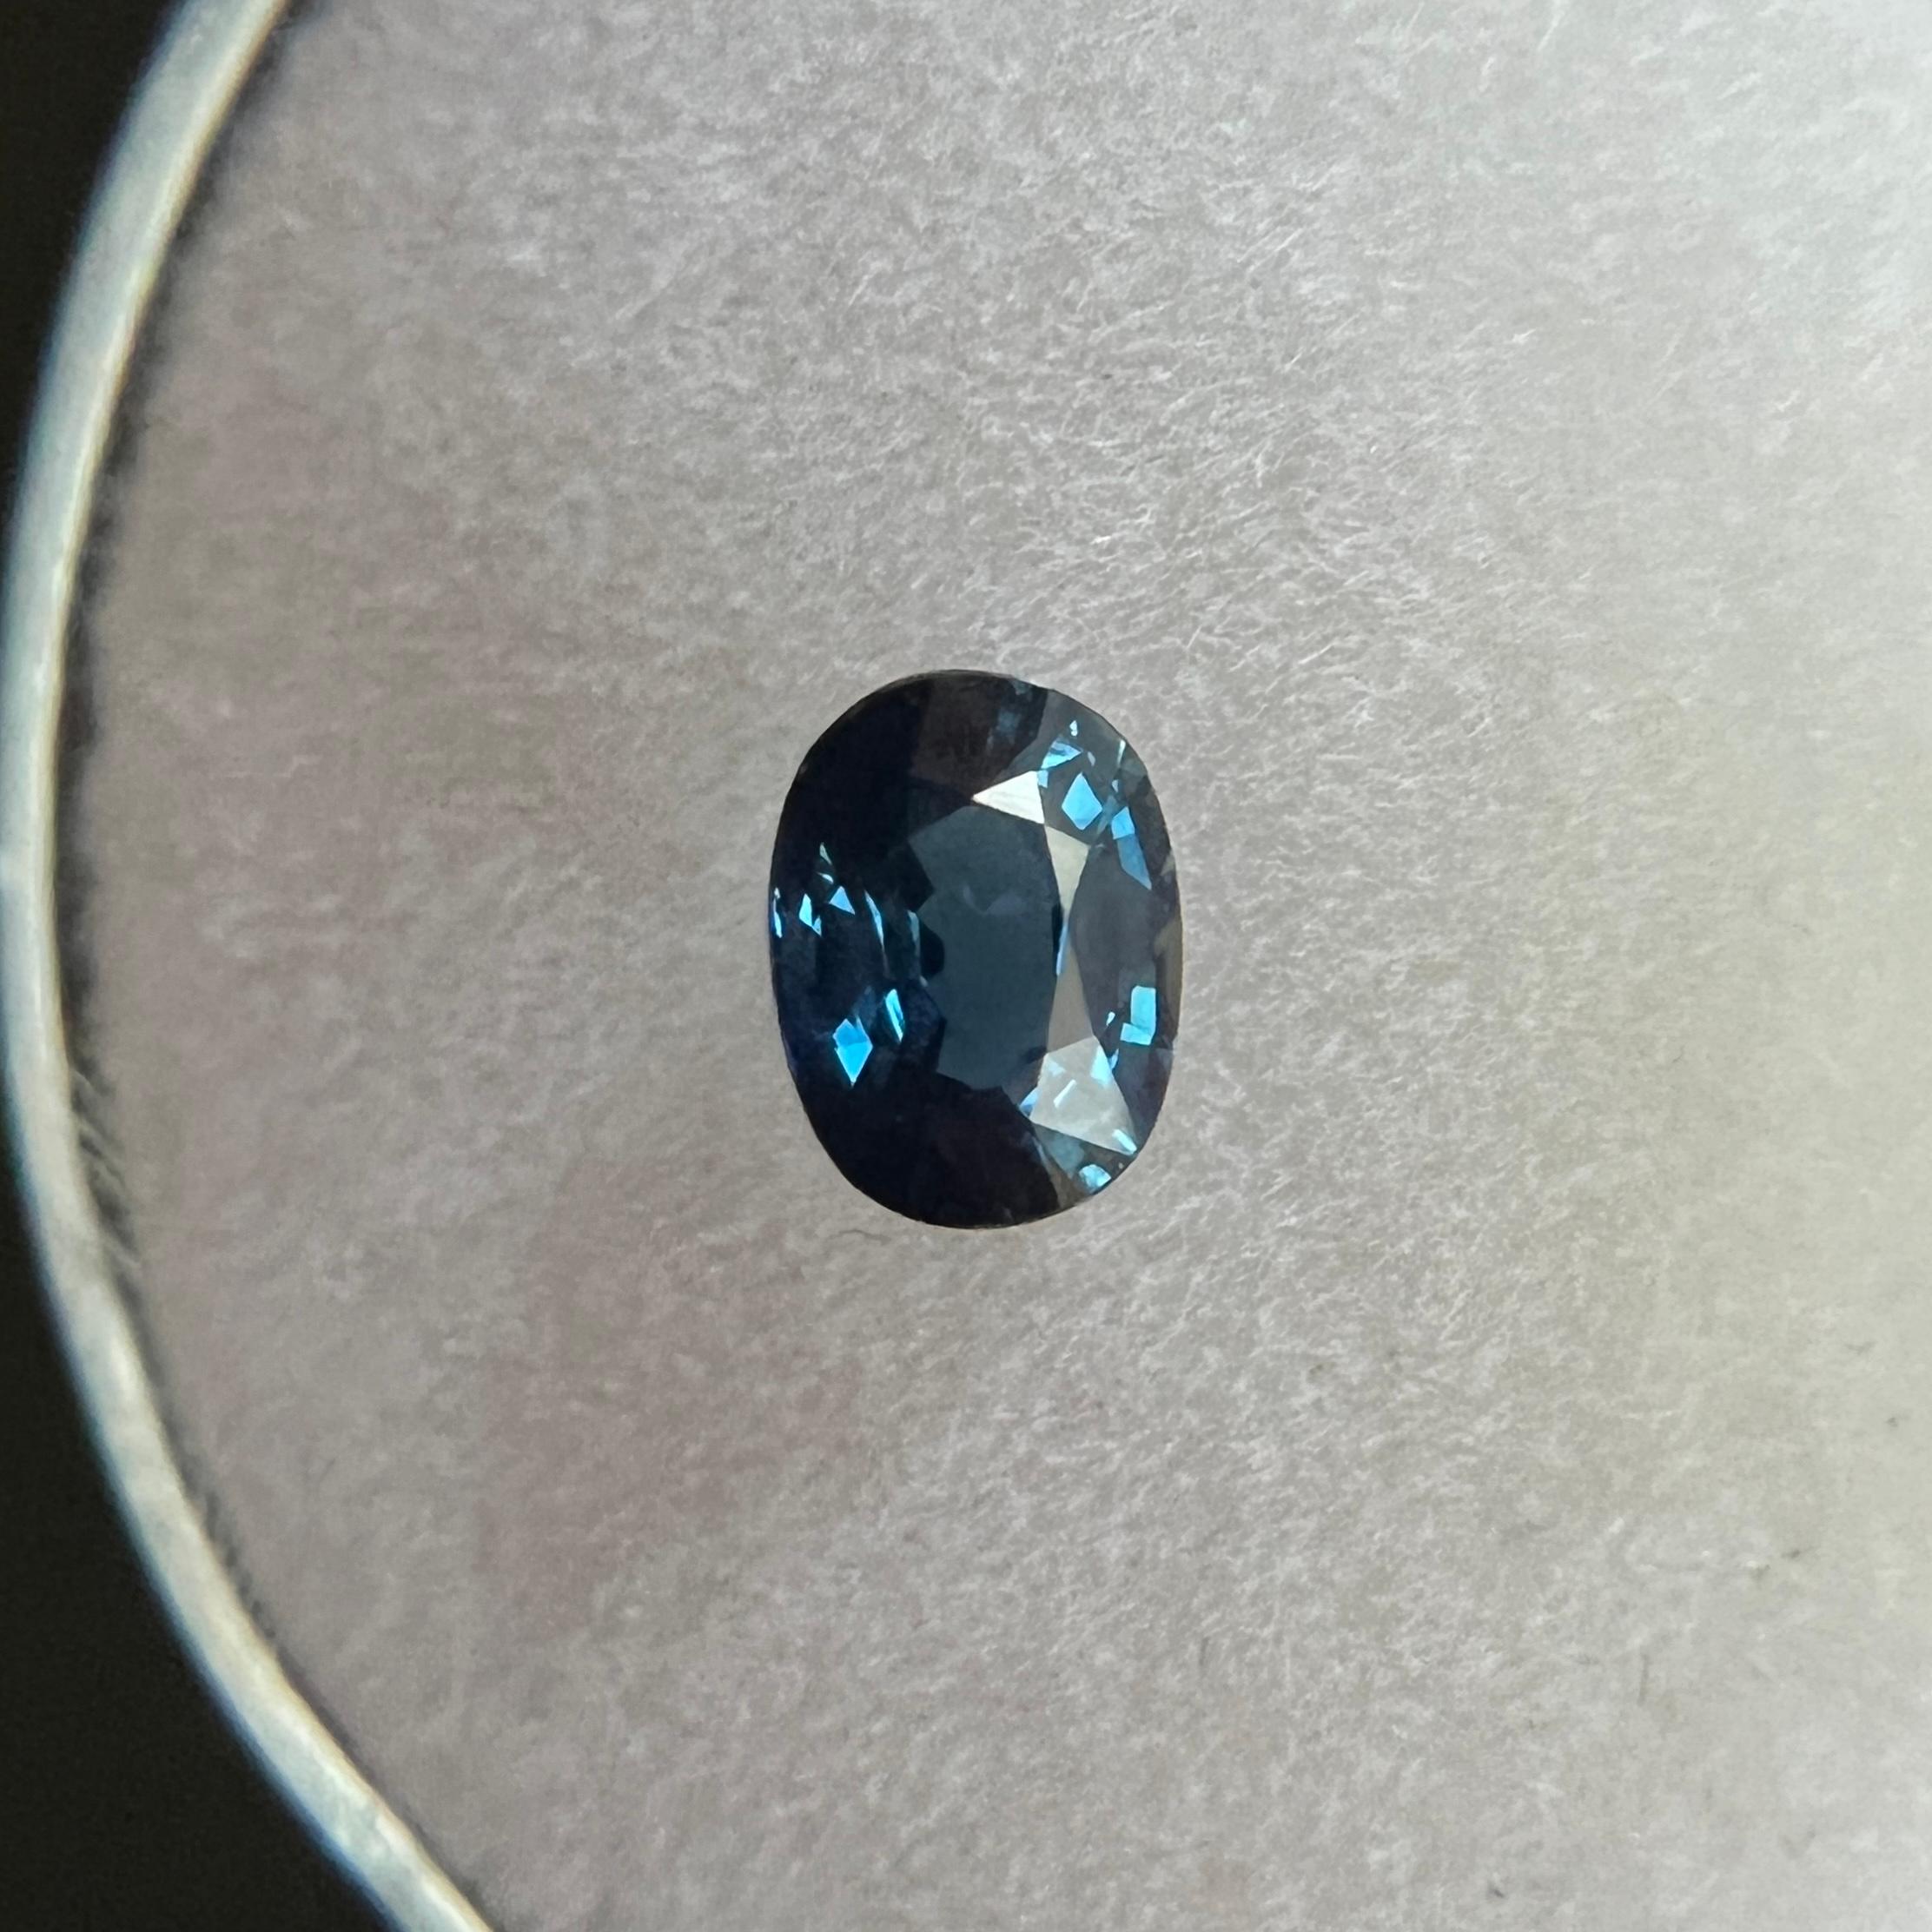 Fine Royal Blue Australian Sapphire Gemstone.

0.63 Carat with a beautiful deep royal blue colour and excellent clarity, a very clean stone.

Also has an excellent oval cut and polish to show great shine and colour, would look lovely in jewellery.